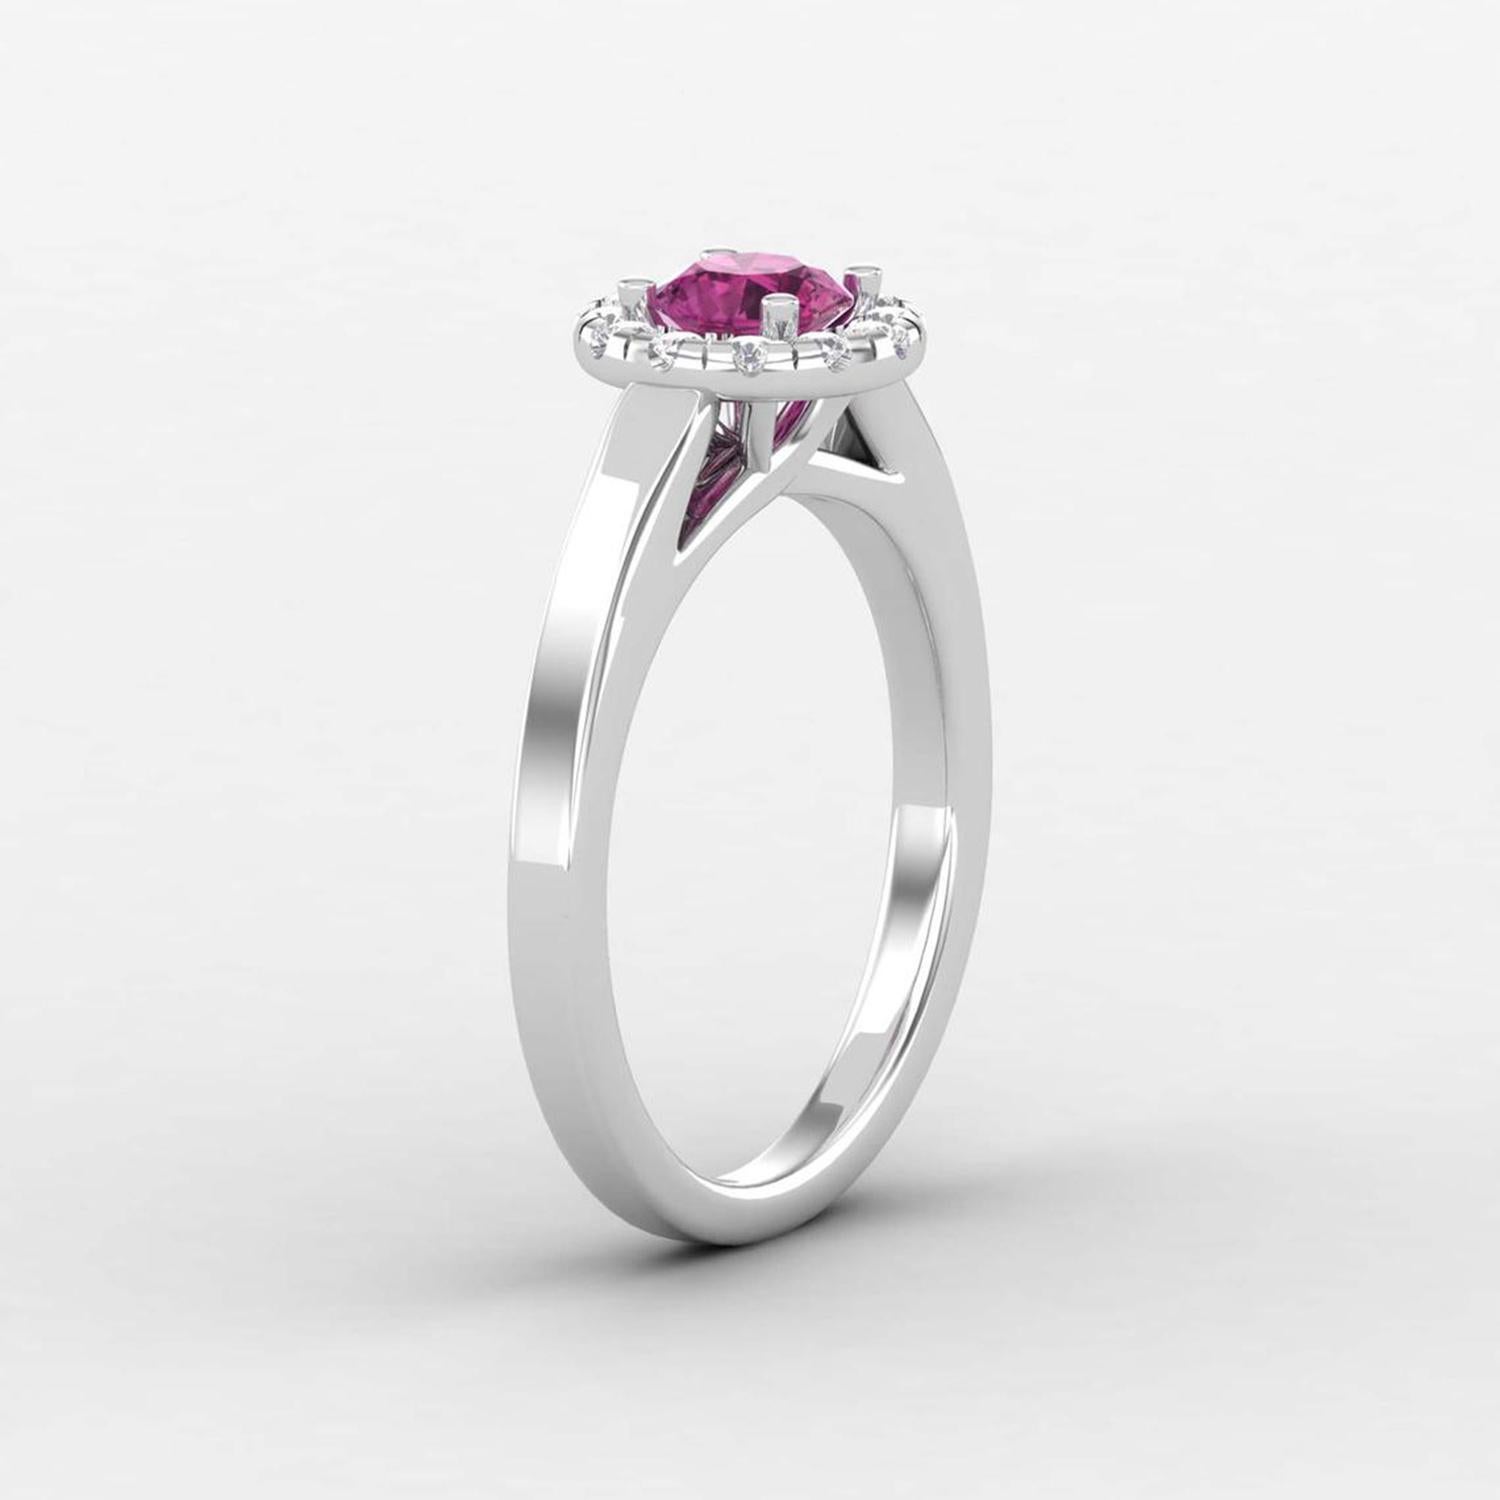 Modern 14 Karat Gold Pink Tourmaline Ring / Diamond Solitaire Ring / Ring for Her For Sale